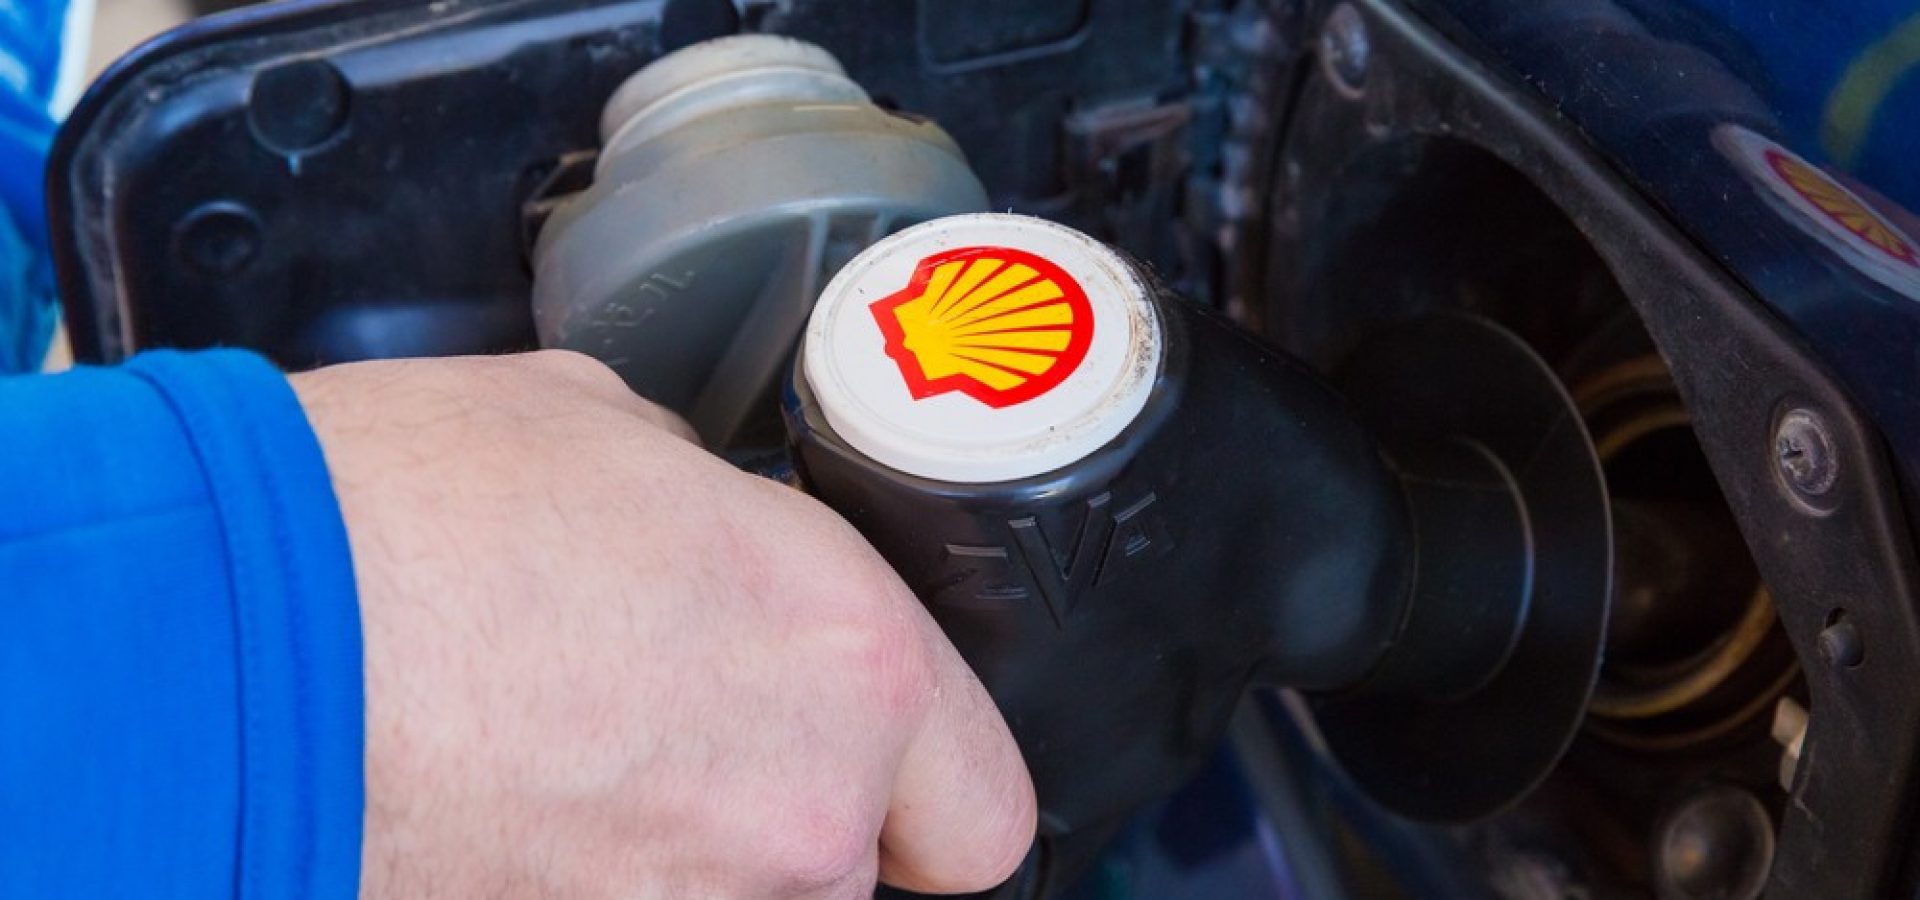 Wibest – Shell Oil Company: A car refueling in Shell.